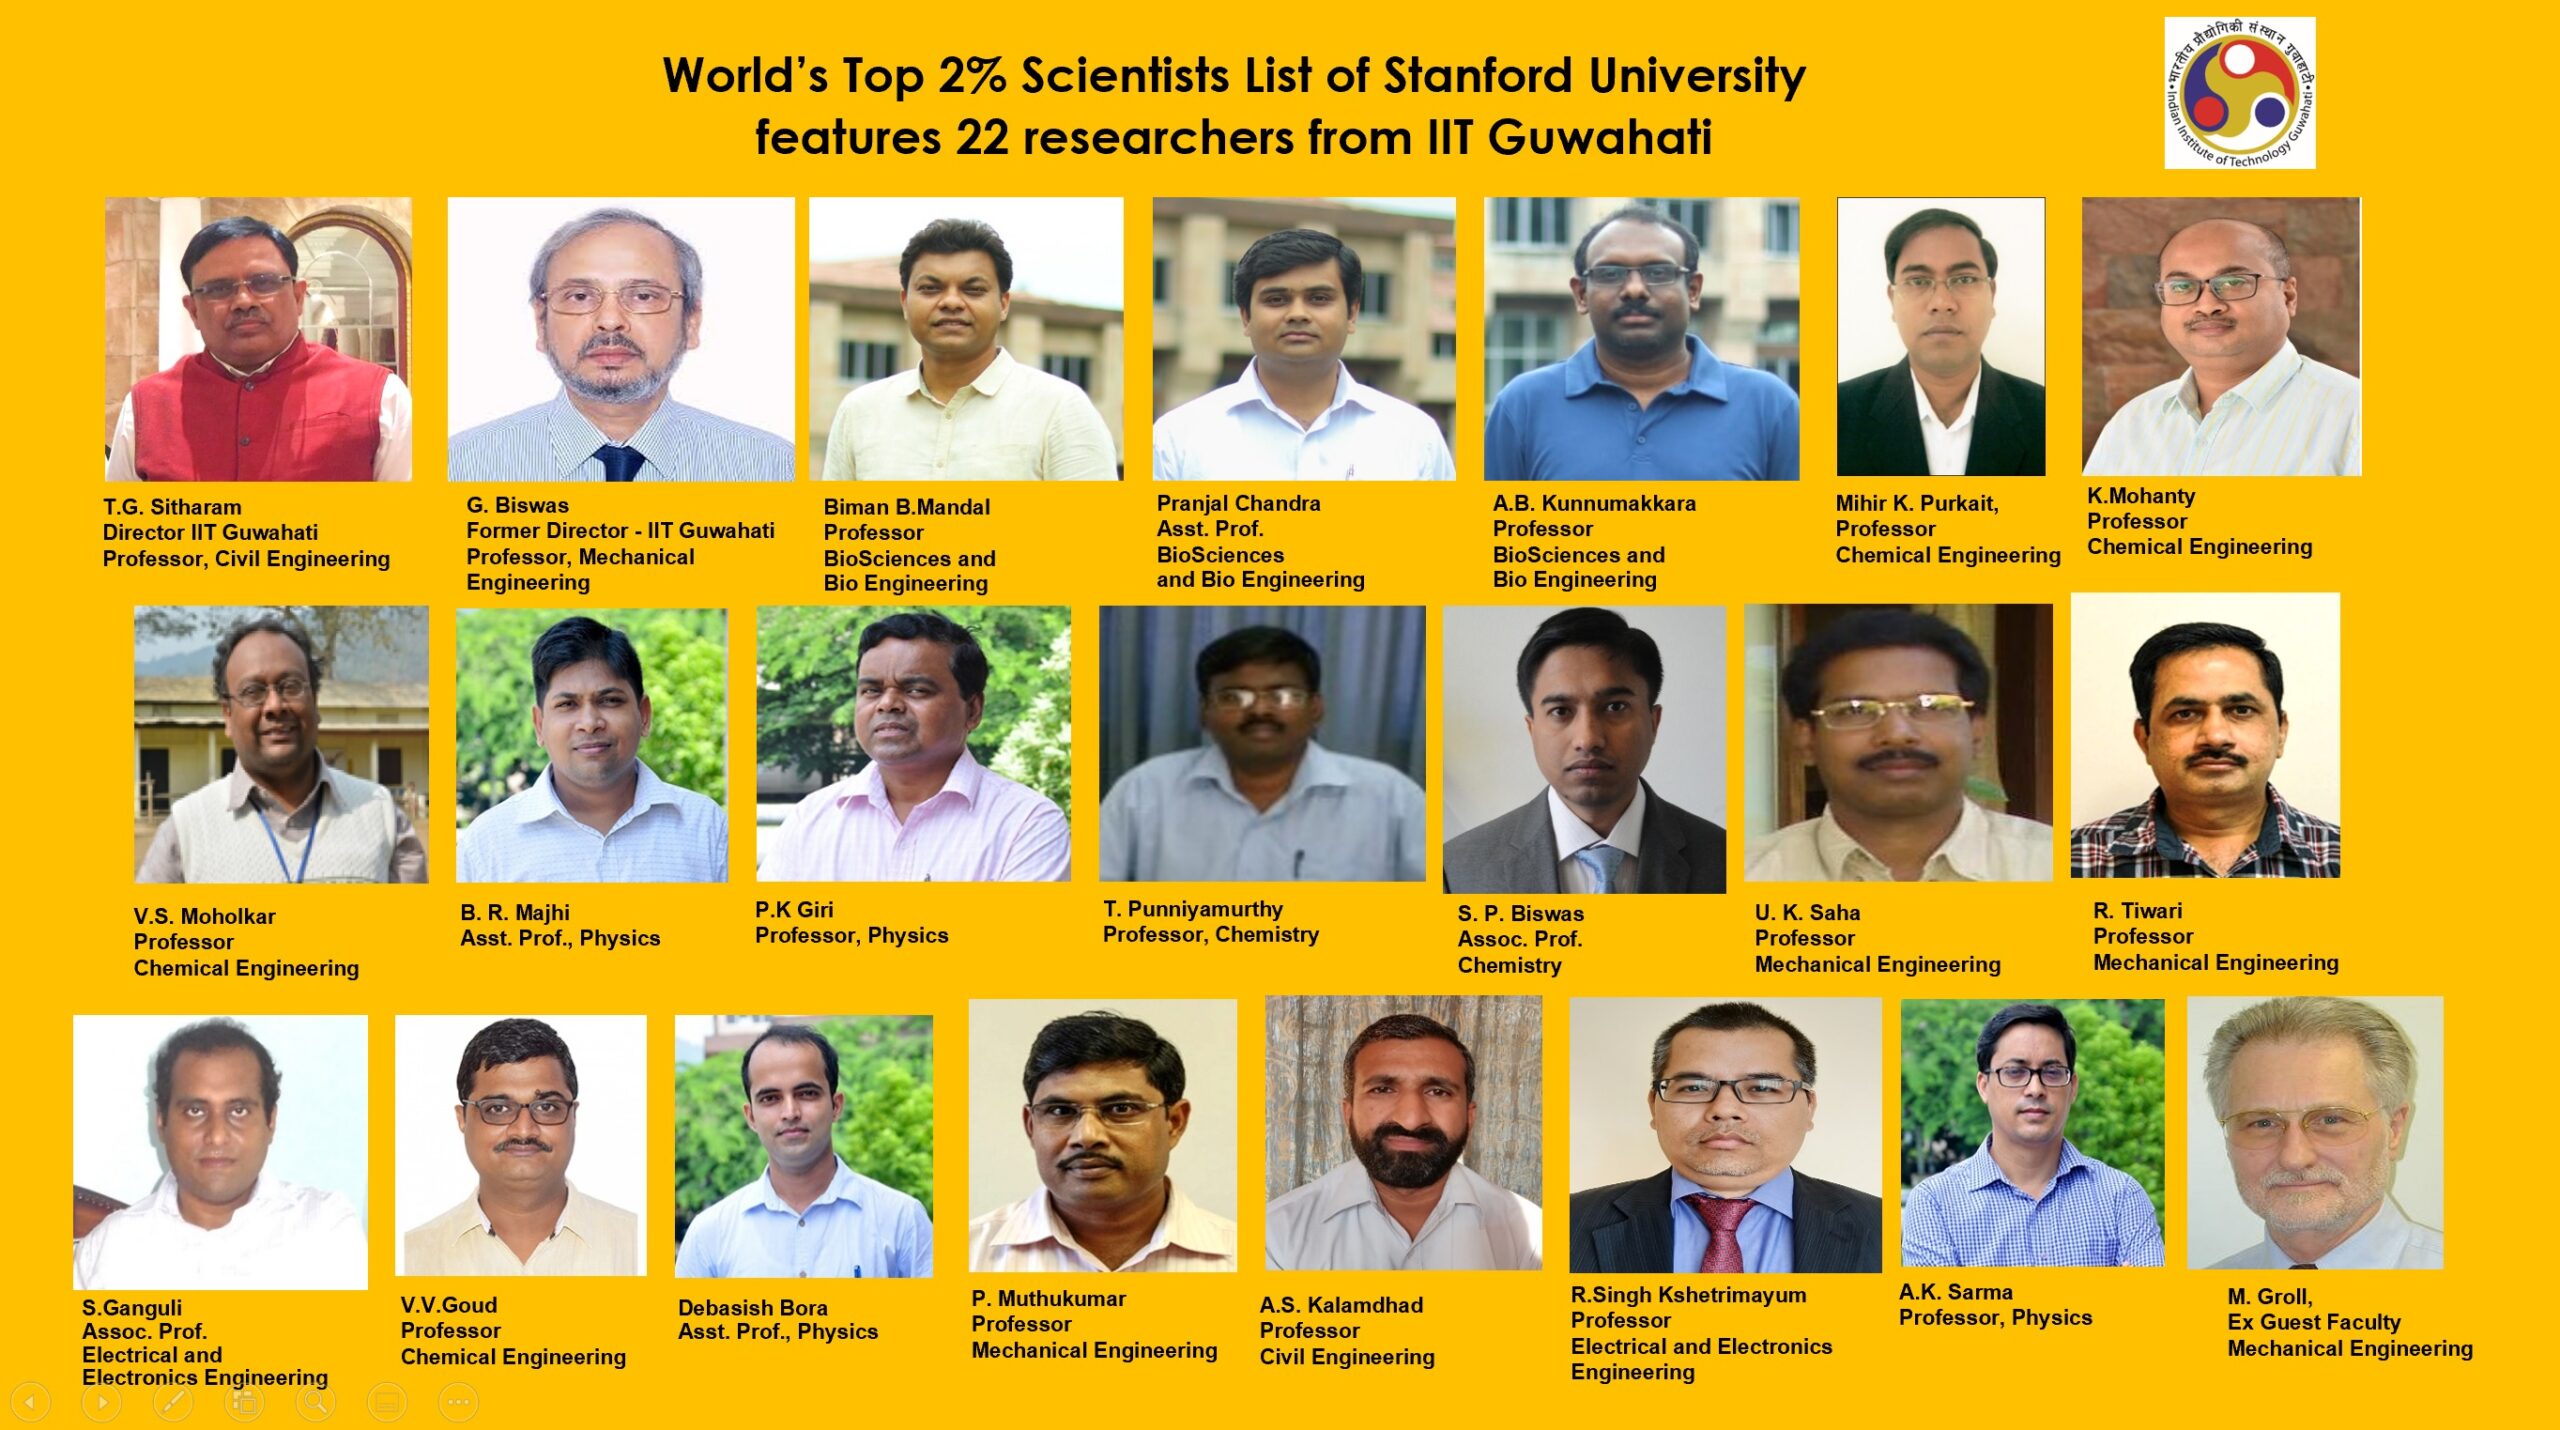 22 researchers from IIT Guwahati feature in the World’s Top 2% Scientists